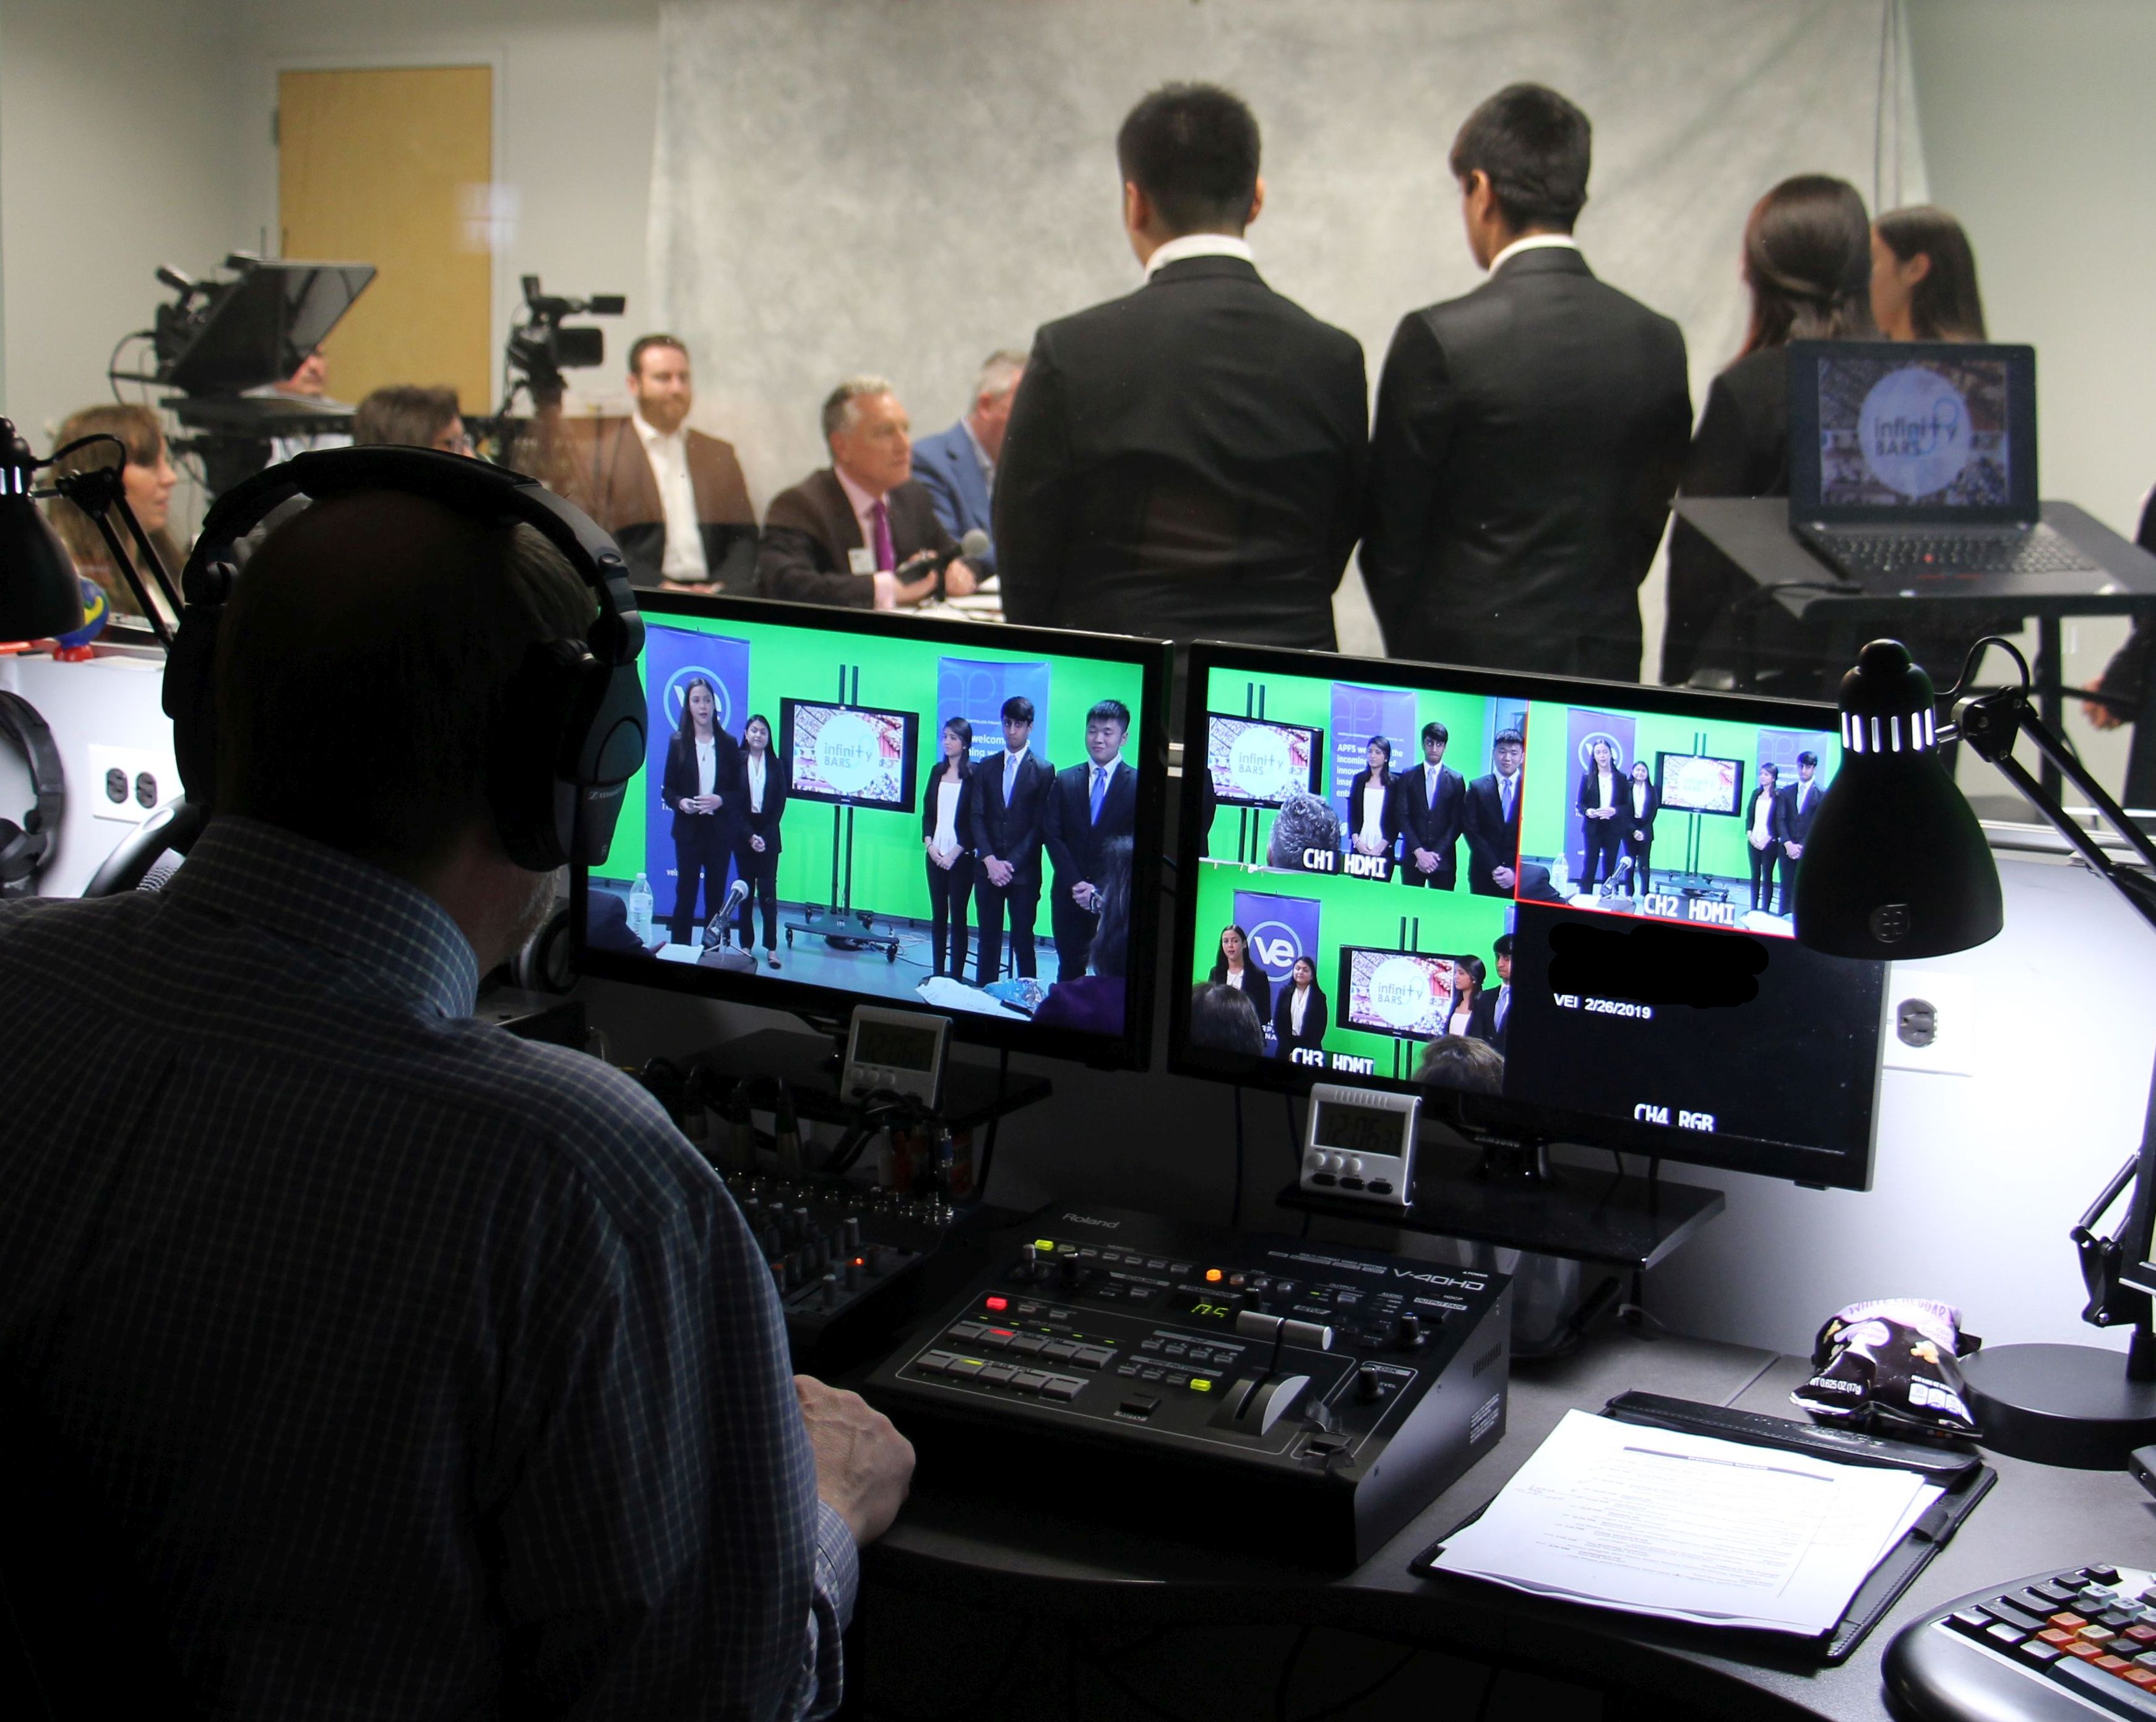 The presentations were held and captured in AP’s in-house production facility, Studio 454, to provide students with playback coverage of their performances.